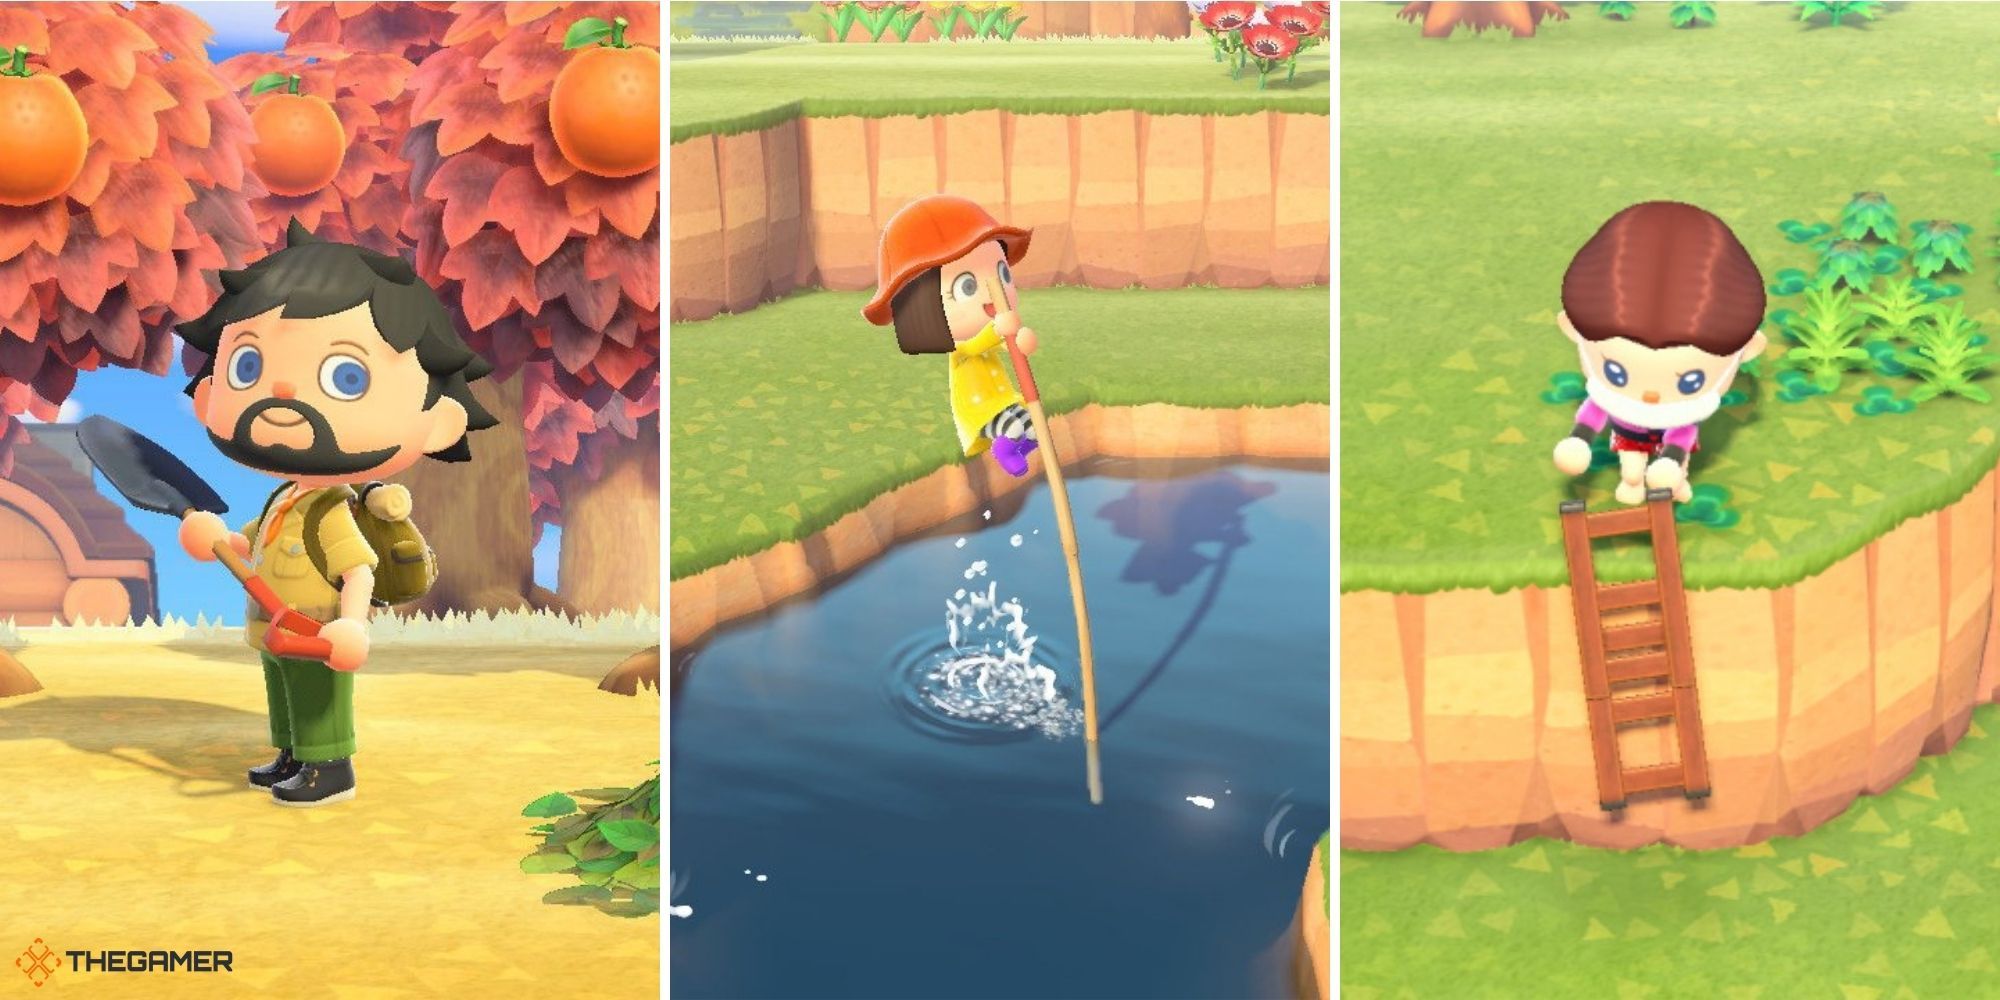 https://static1.thegamerimages.com/wordpress/wp-content/uploads/2022/01/Animal-Crossing-New-Horizons---players-with-various-tools-(shovel-vaulting-pole-ladder).jpg